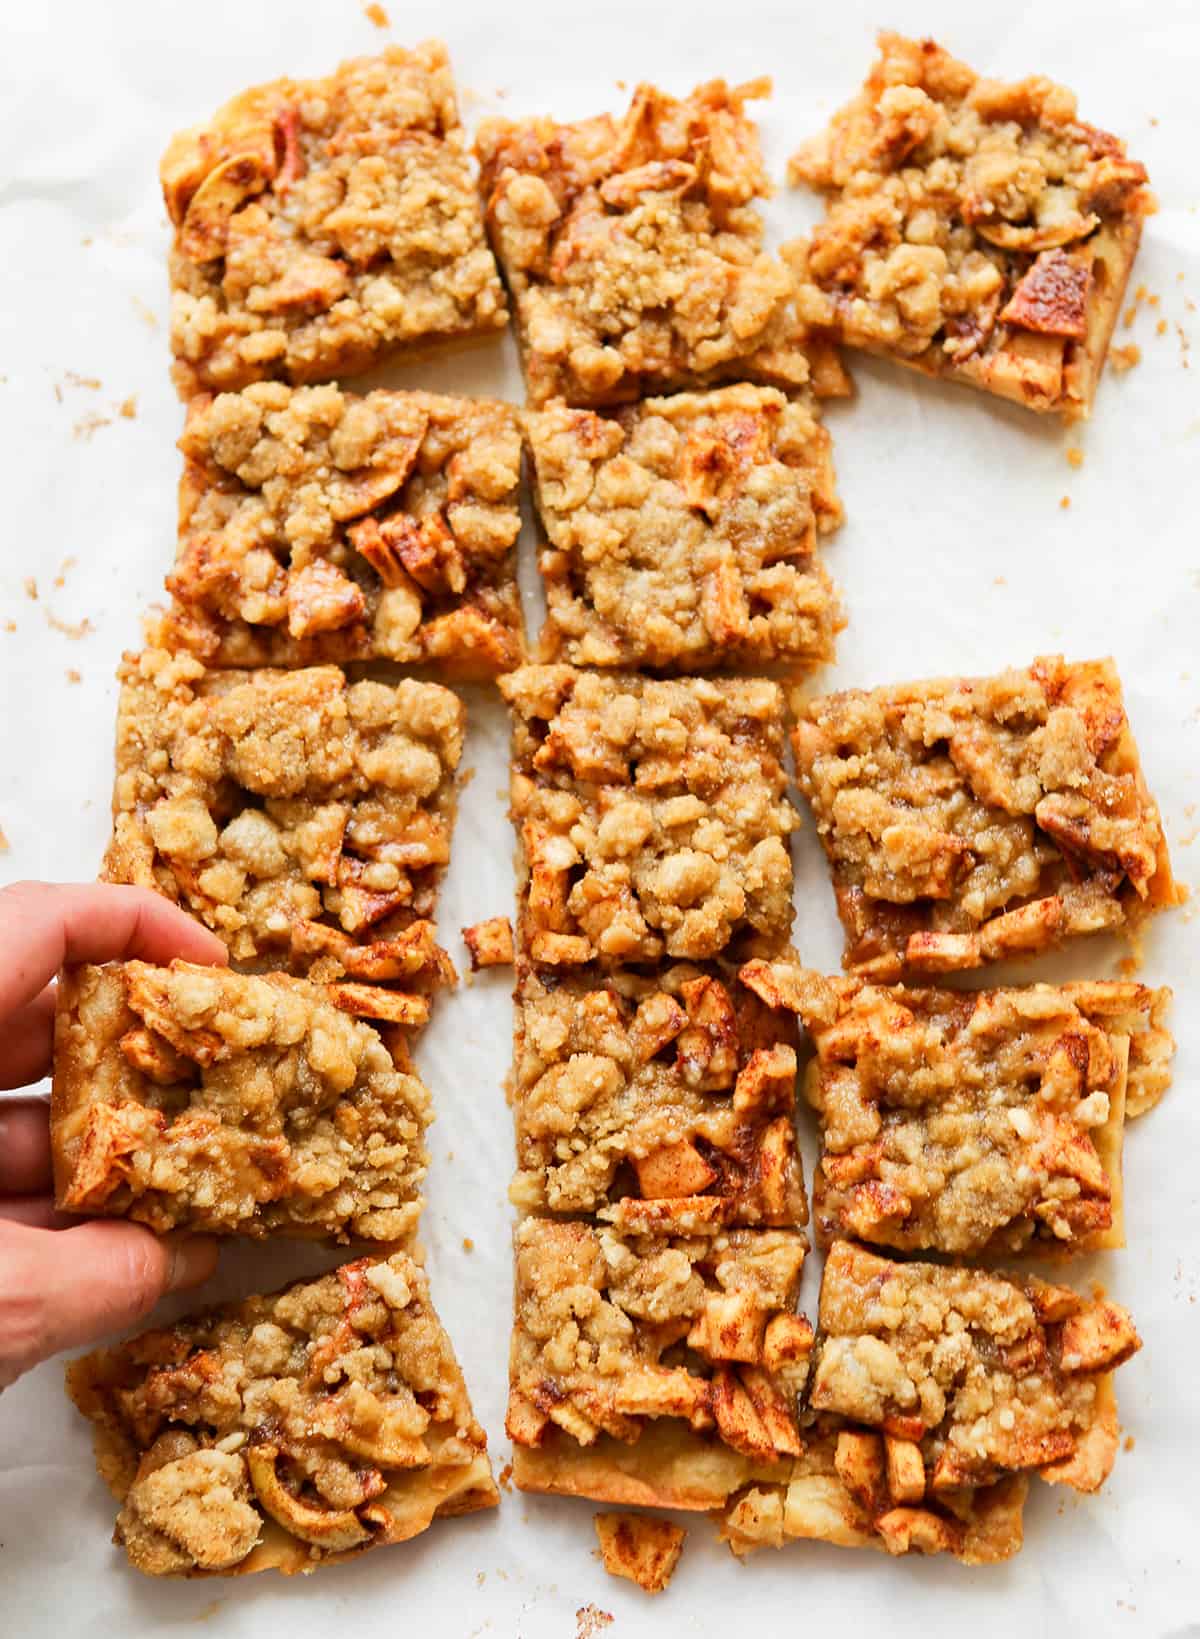 Apple pie bars lined up on parchment paper, with a hand taking one away.